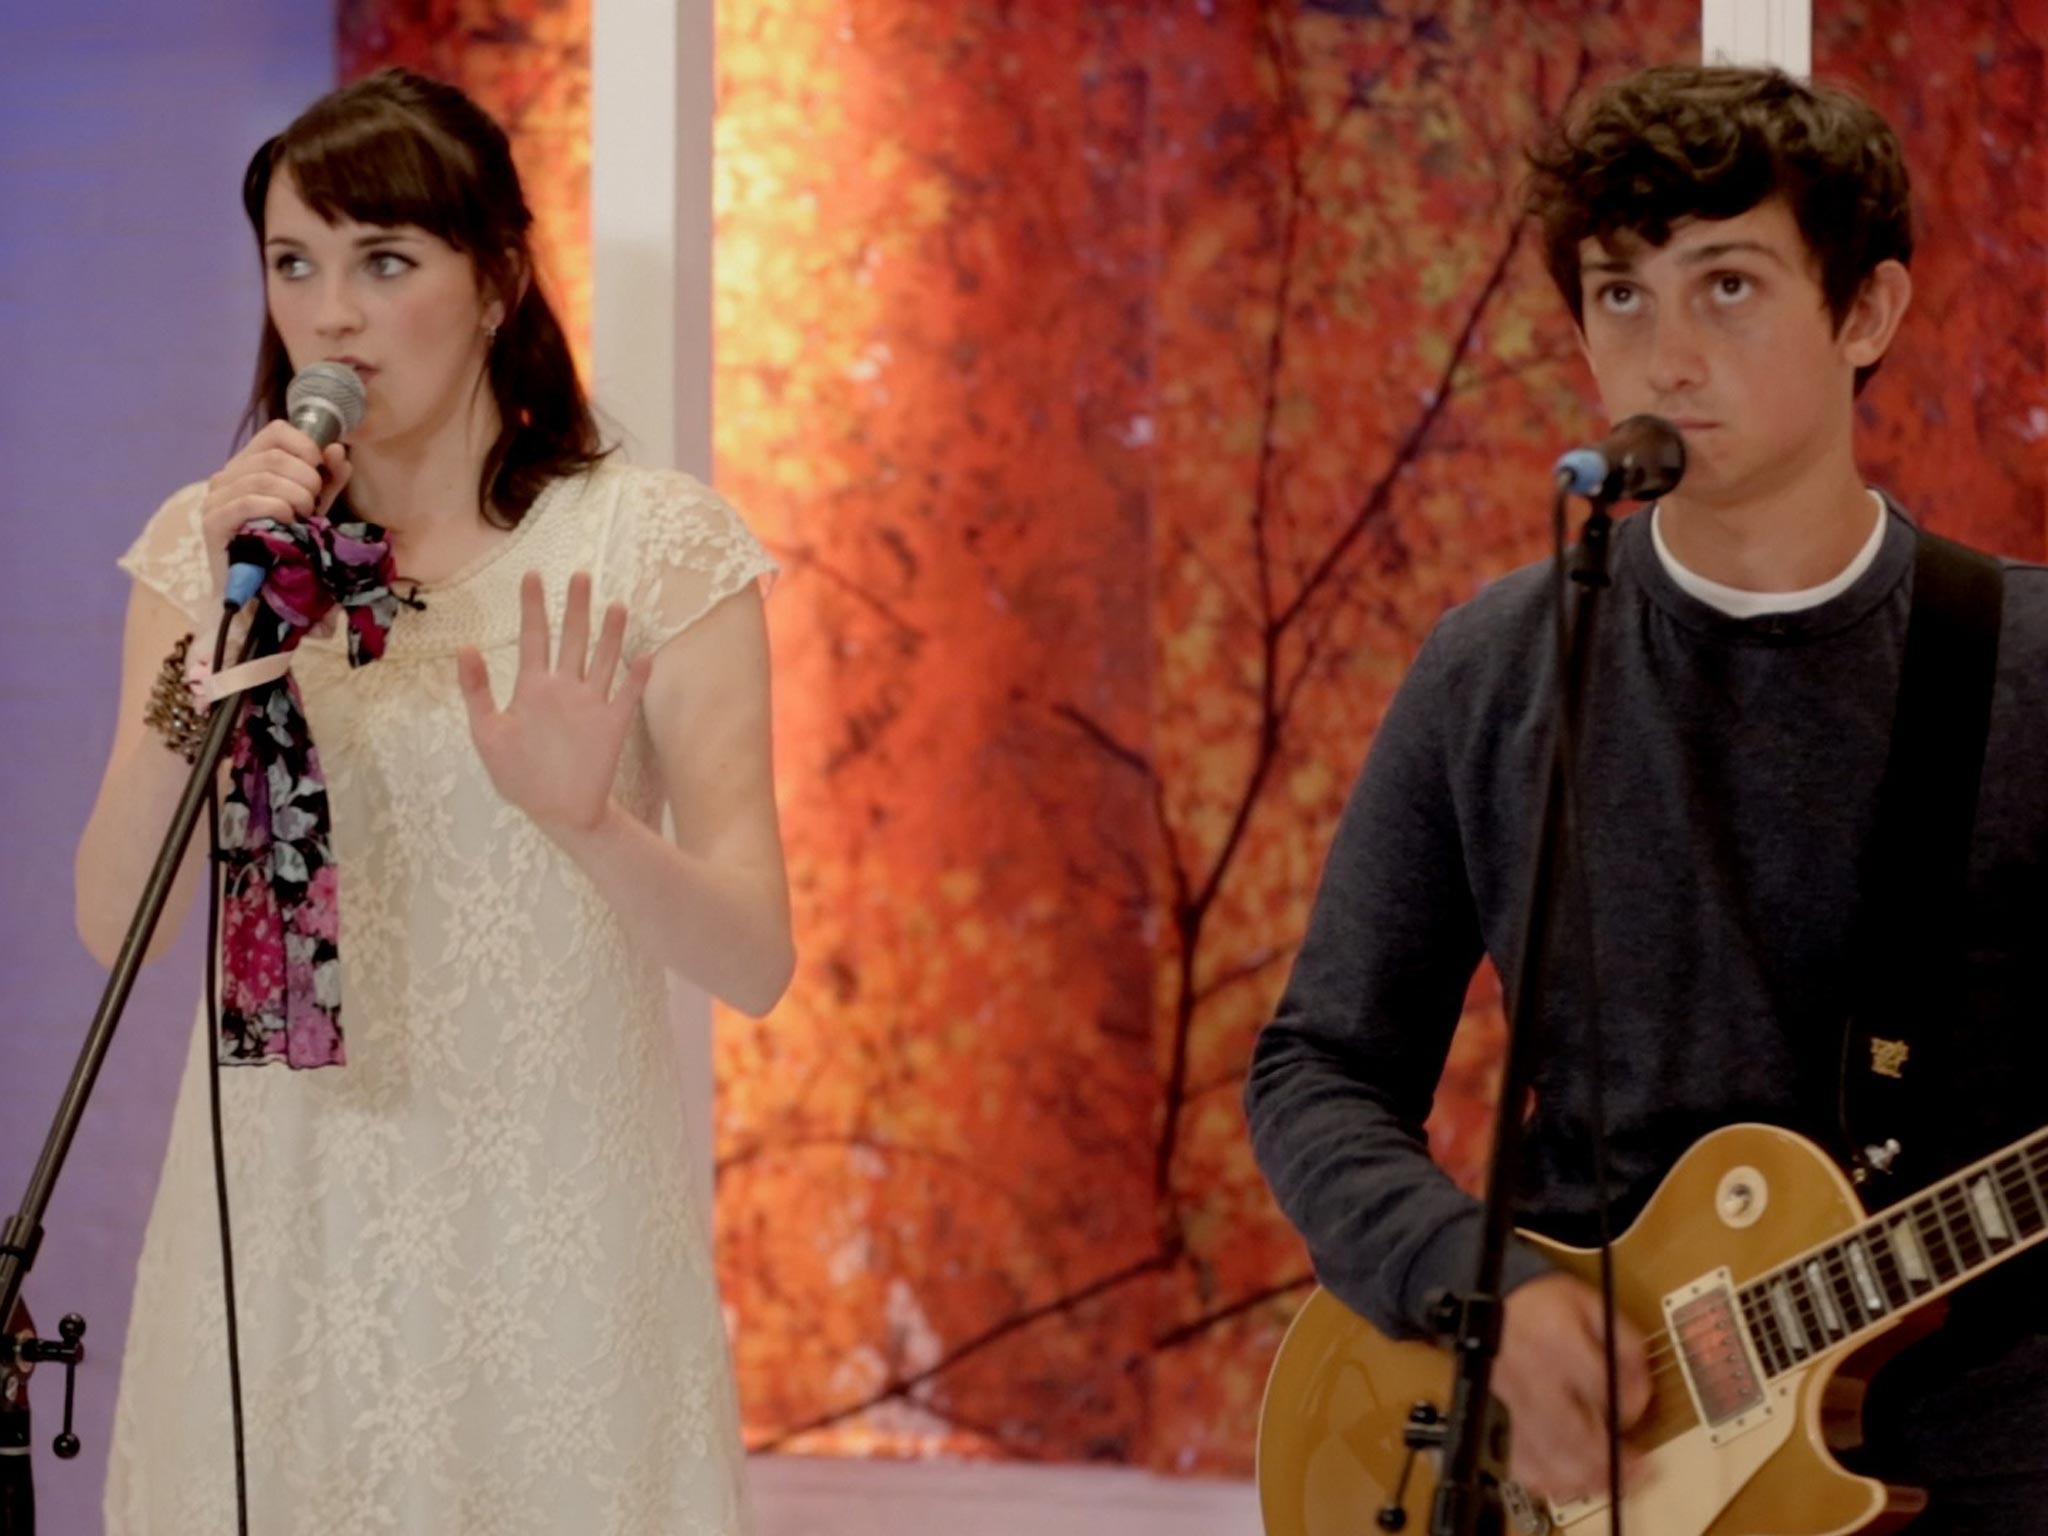 Craig Roberts and Charlotte Ritchie play a musical duo in 'Benny and Jolene'